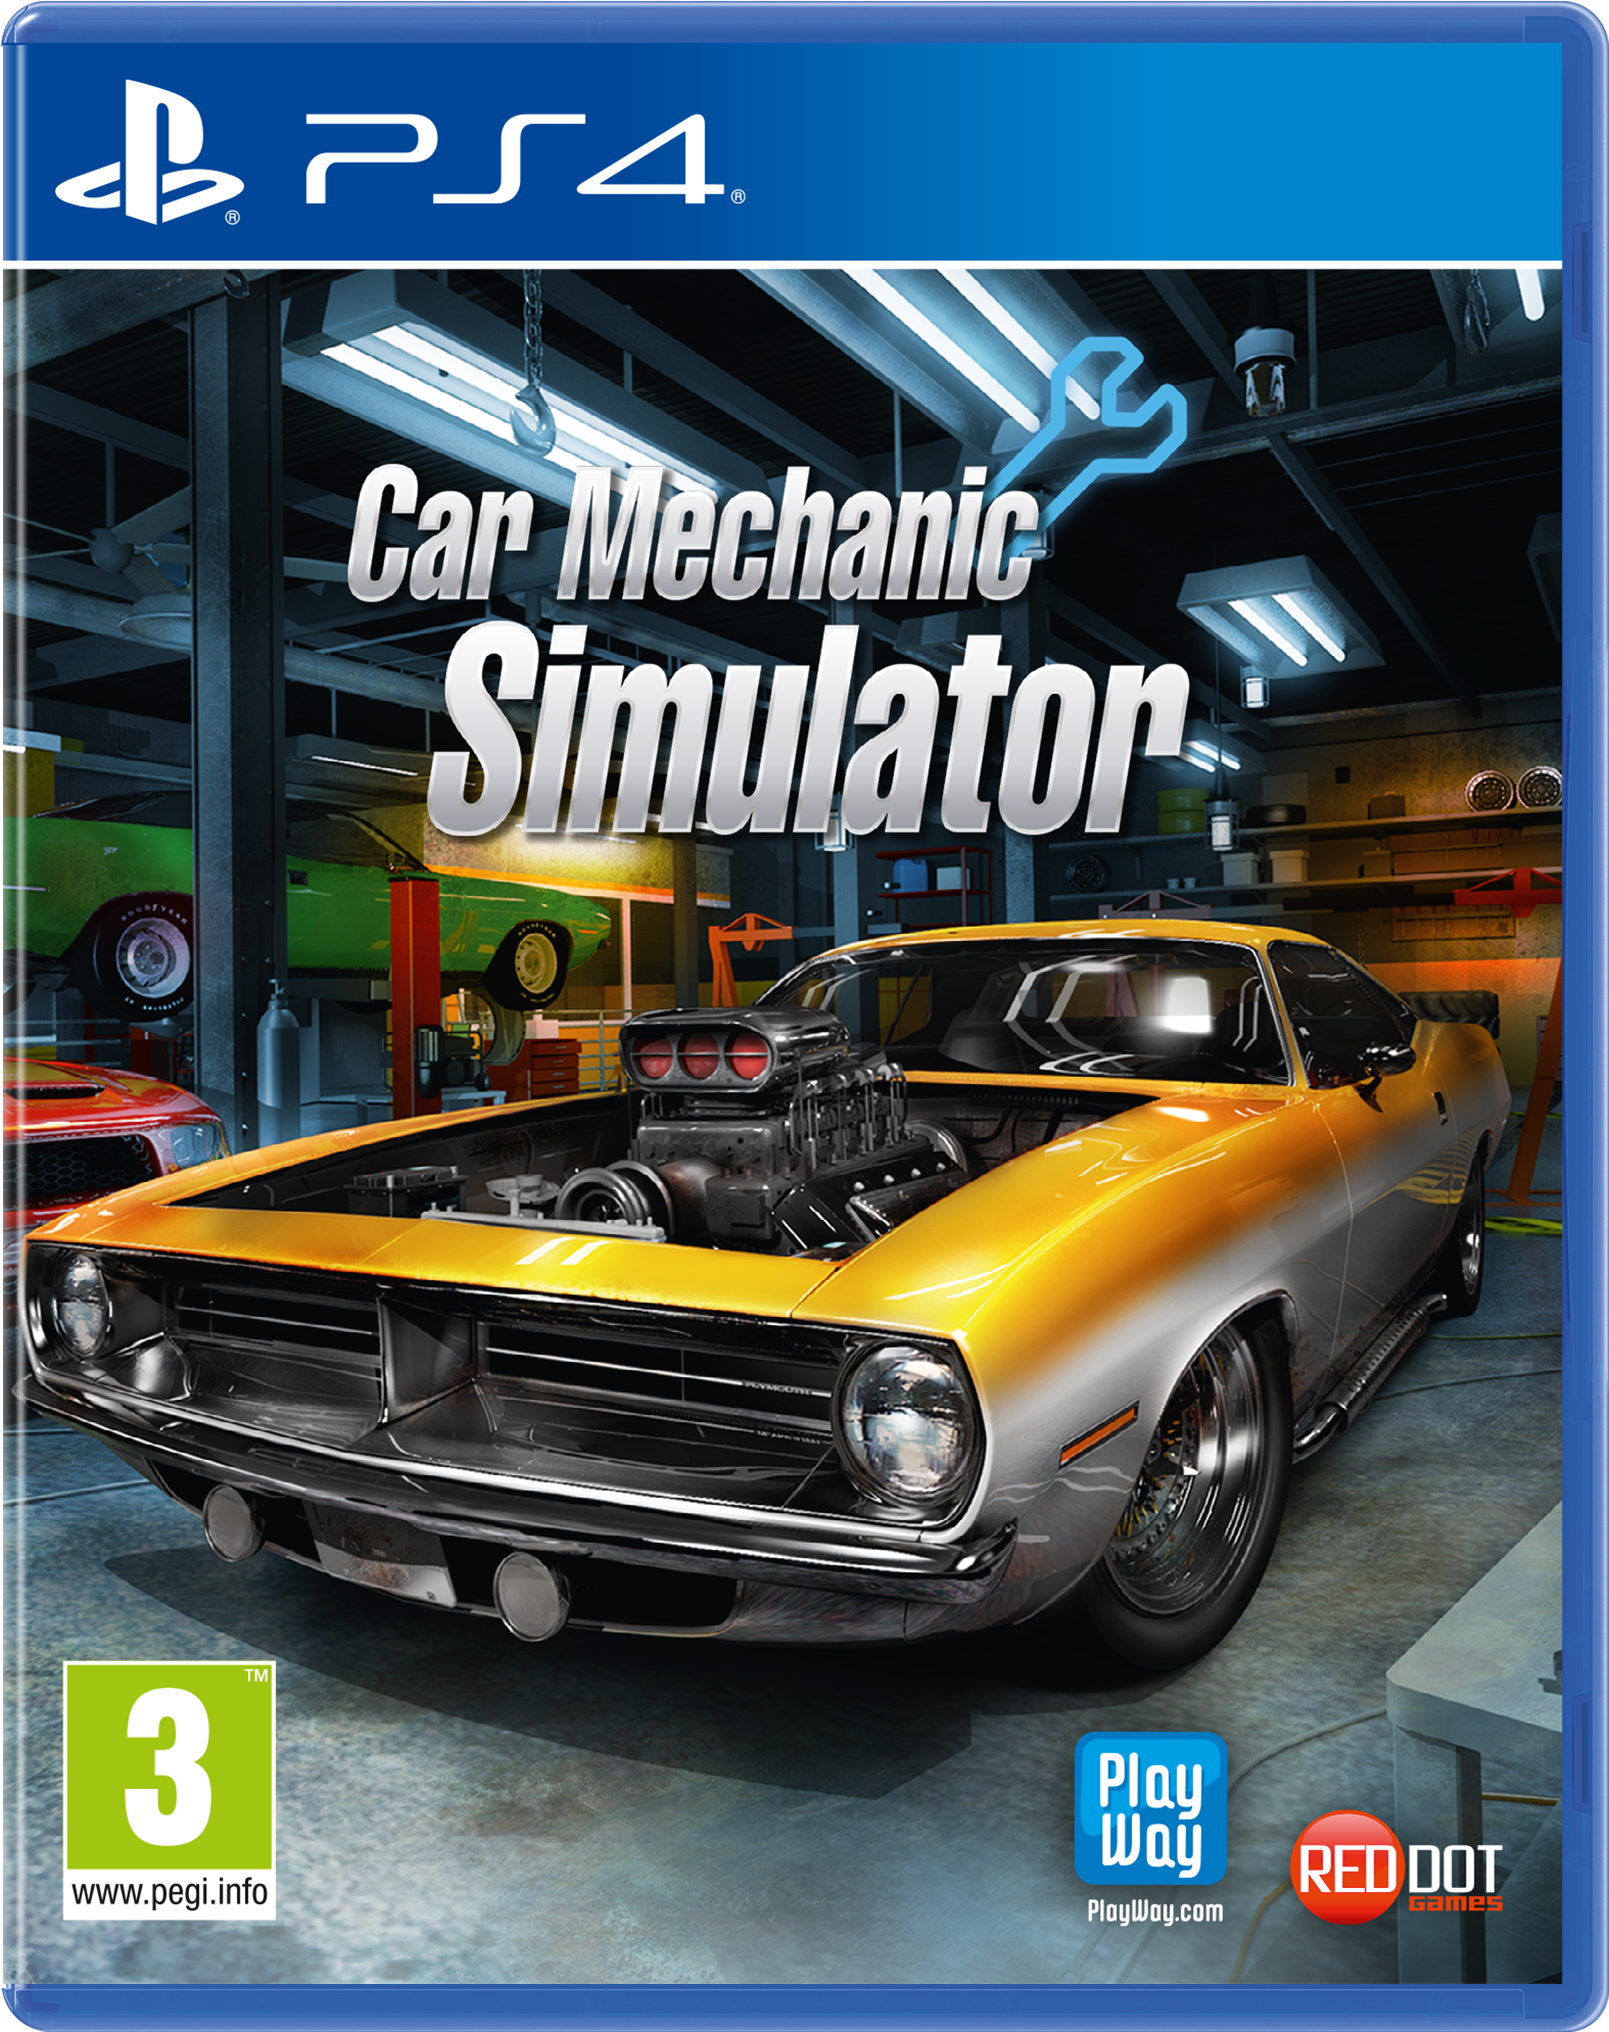 A Video Game Cover With A Car In The Center